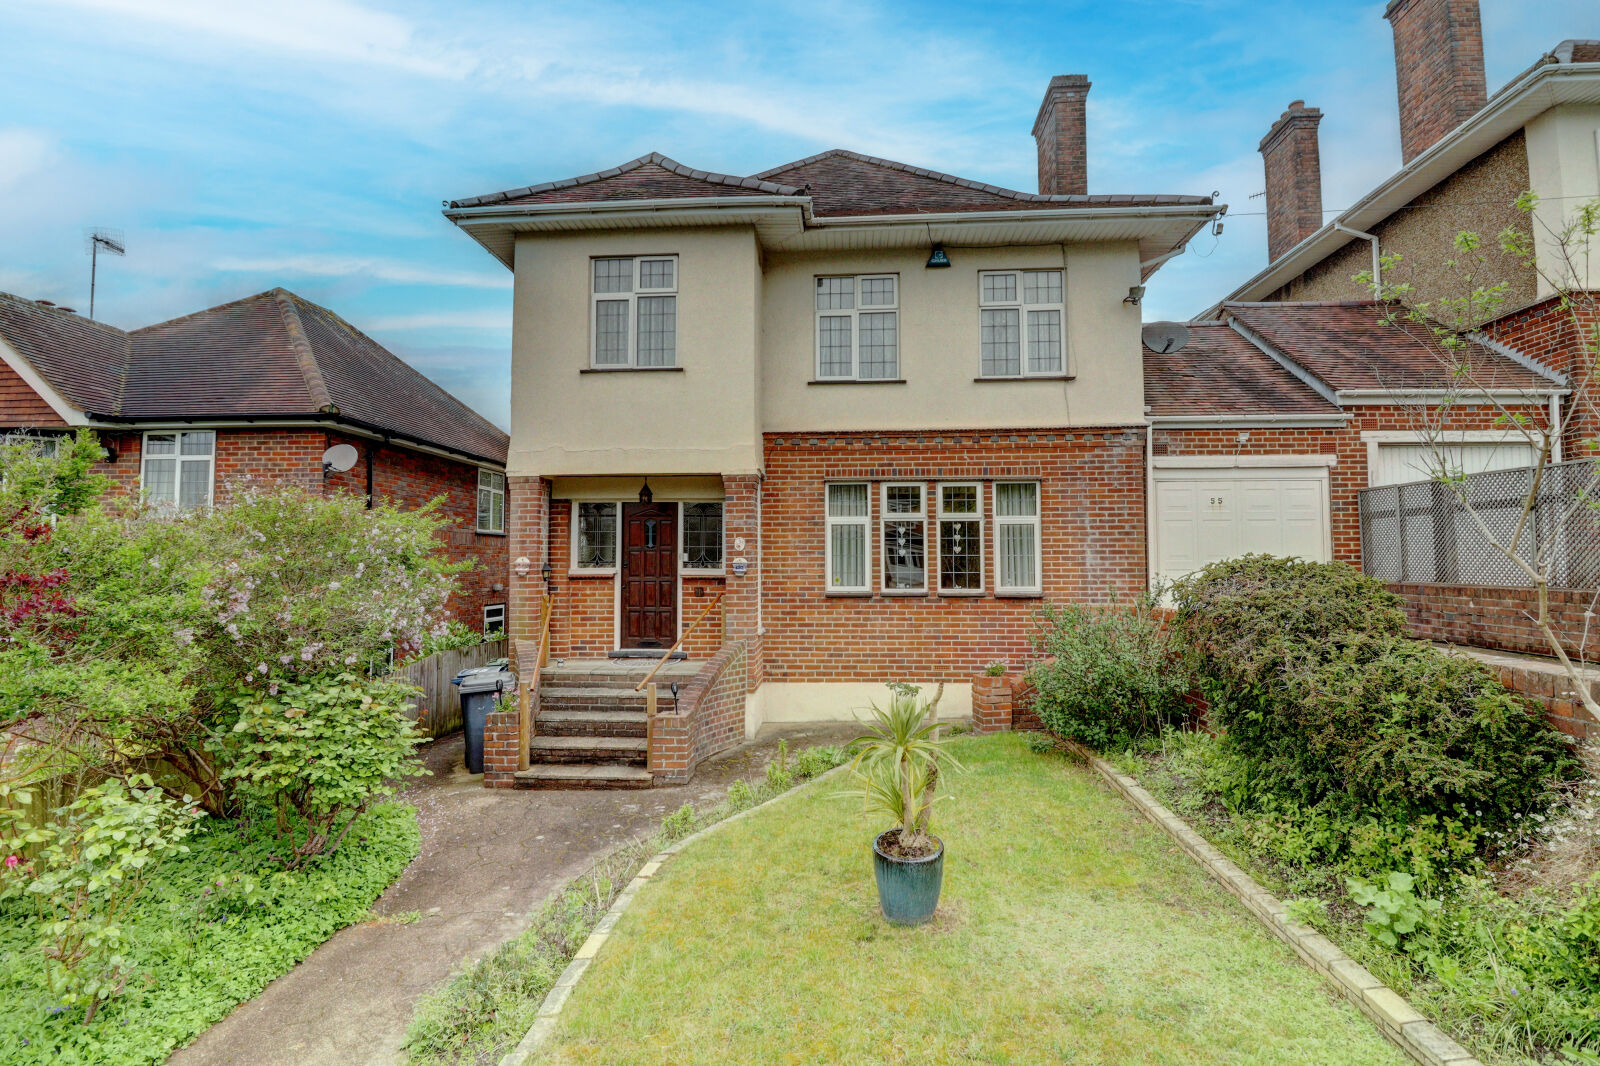 3 bedroom link detached house for sale Hamilton Road, High Wycombe, HP13, main image